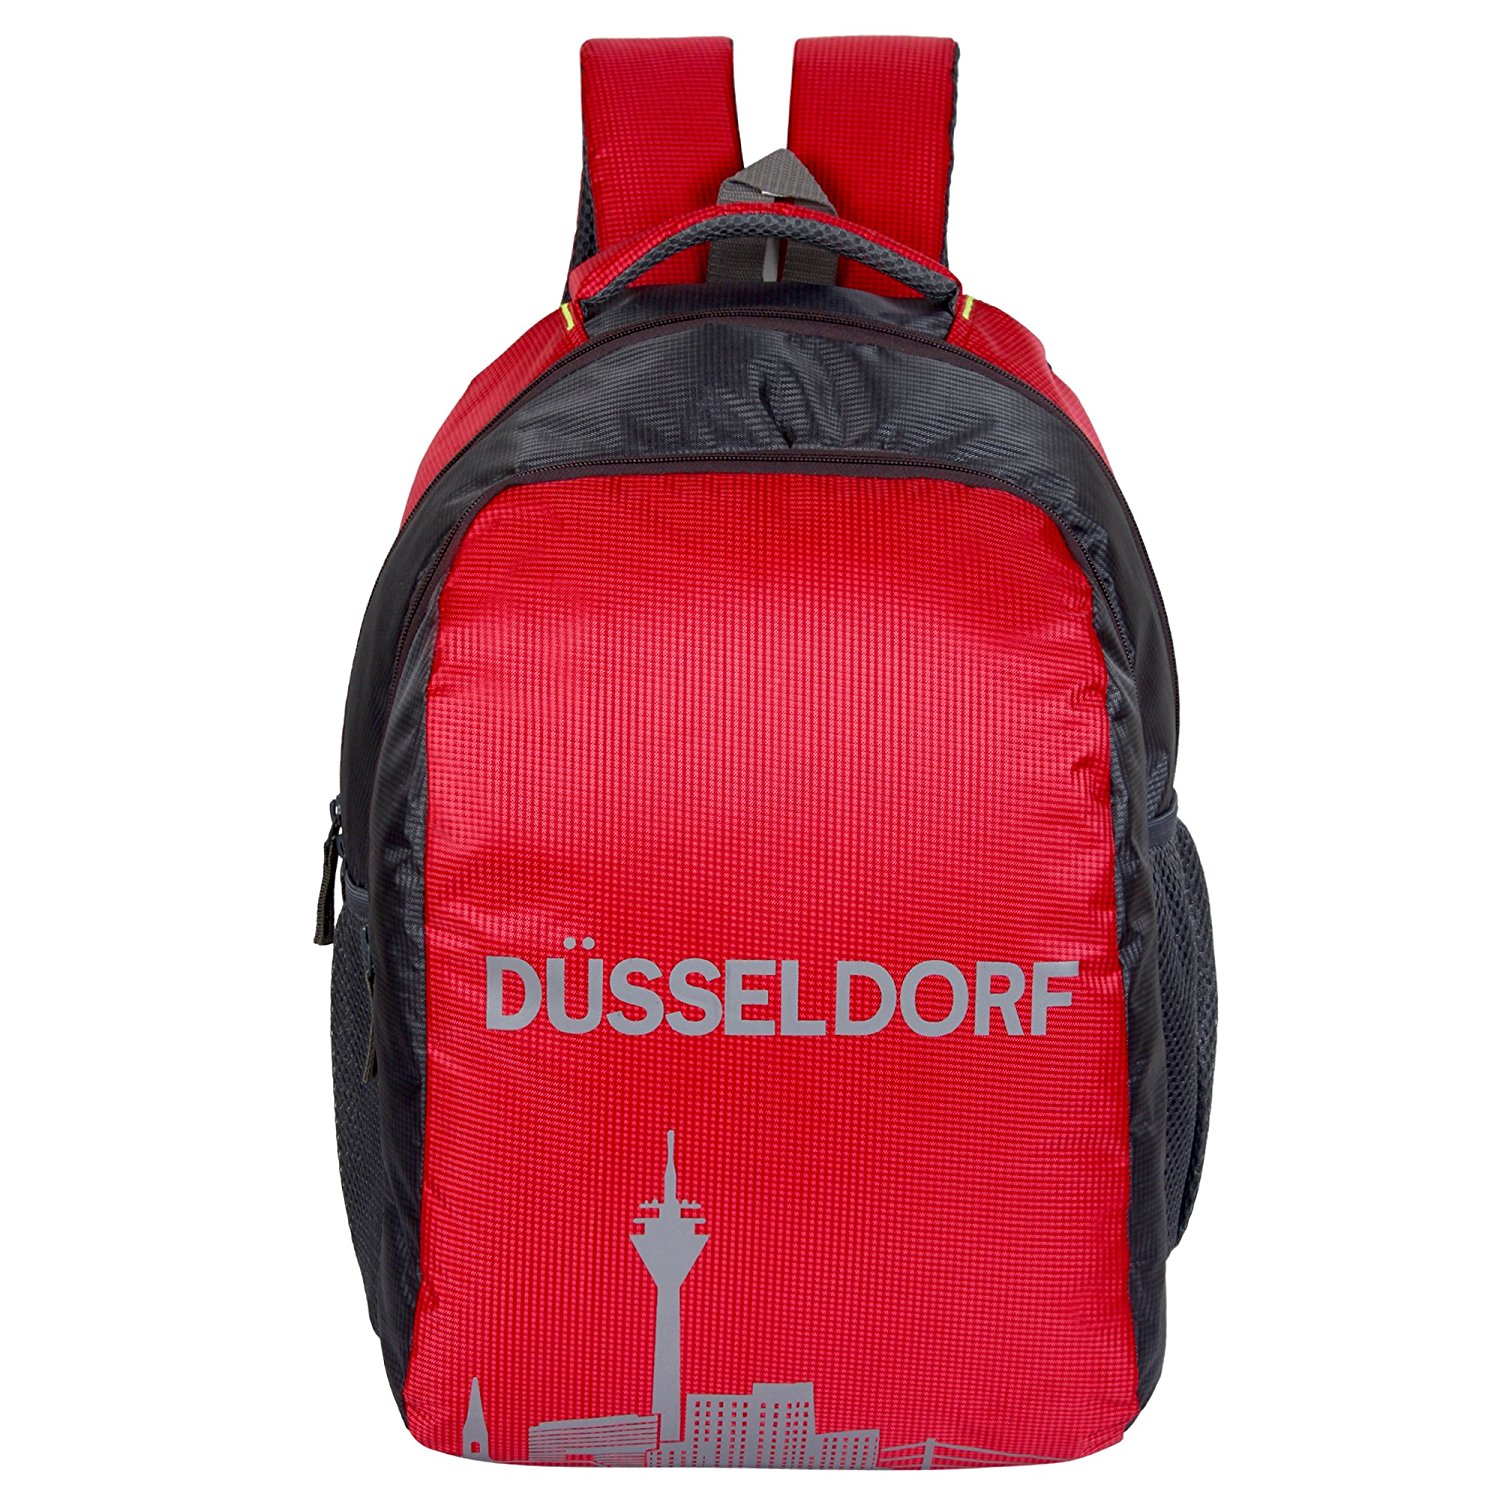 Dussledorf Polyester 20 Liters Grey And Red Laptop Backpack With Adjustable Strap